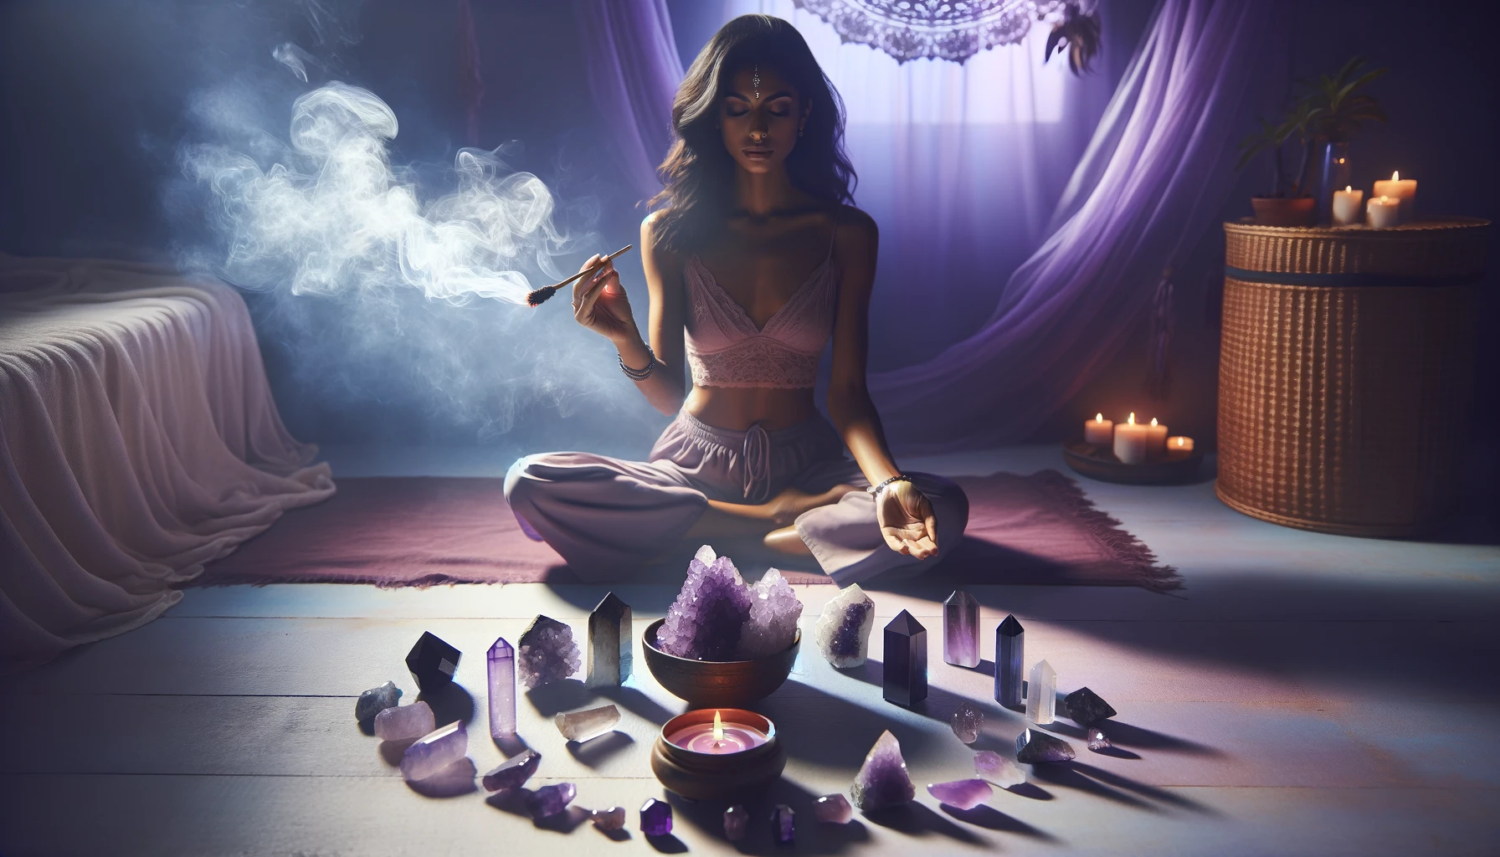 A banner-sized image of a woman of South Asian descent smudging crystals with a predominant purple theme. The woman is sitting cross-legged in a serene, softly lit room, surrounded by various crystals laid out in front of her. In her hands, she gently waves a smudging stick, releasing wisps of smoke that weave around the crystals, symbolizing cleansing and purification. The crystals themselves emit a subtle, mystical glow, with shades of amethyst and other purple stones prominent in the array. The overall ambiance of the scene is tranquil and meditative, with a backdrop of purple drapery and ambient lighting that casts a soothing, violet hue across the space. The image captures the essence of spiritual practice and the healing energy of crystals.